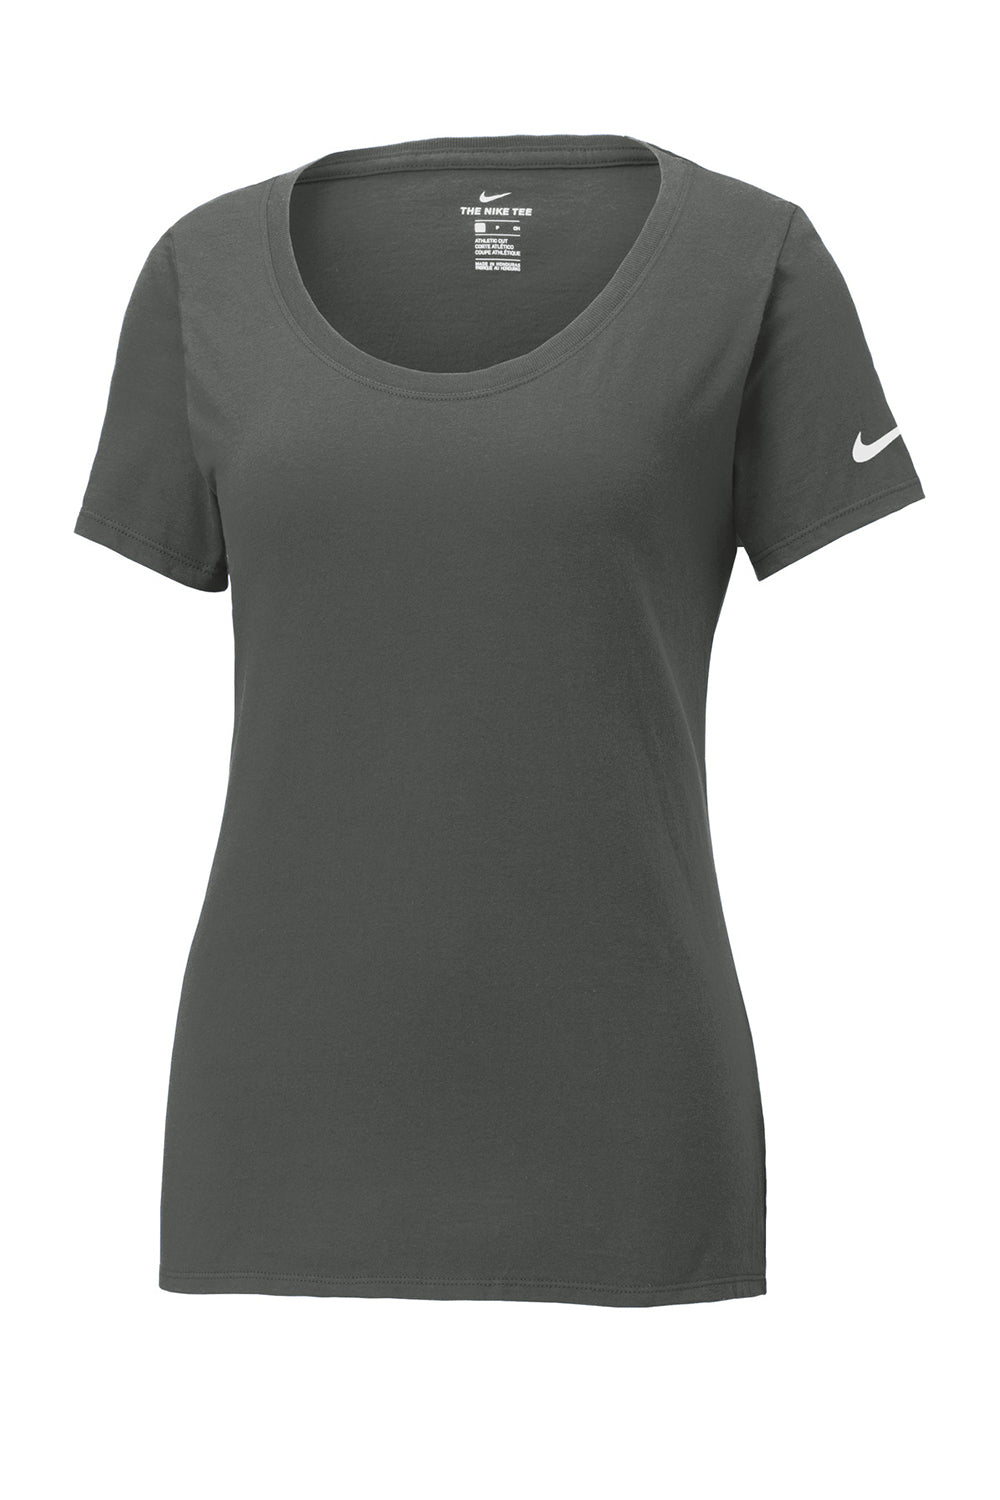 Nike NKBQ5234 Womens Dri-Fit Moisture Wicking Short Sleeve Scoop Neck T-Shirt Anthracite Grey Flat Front